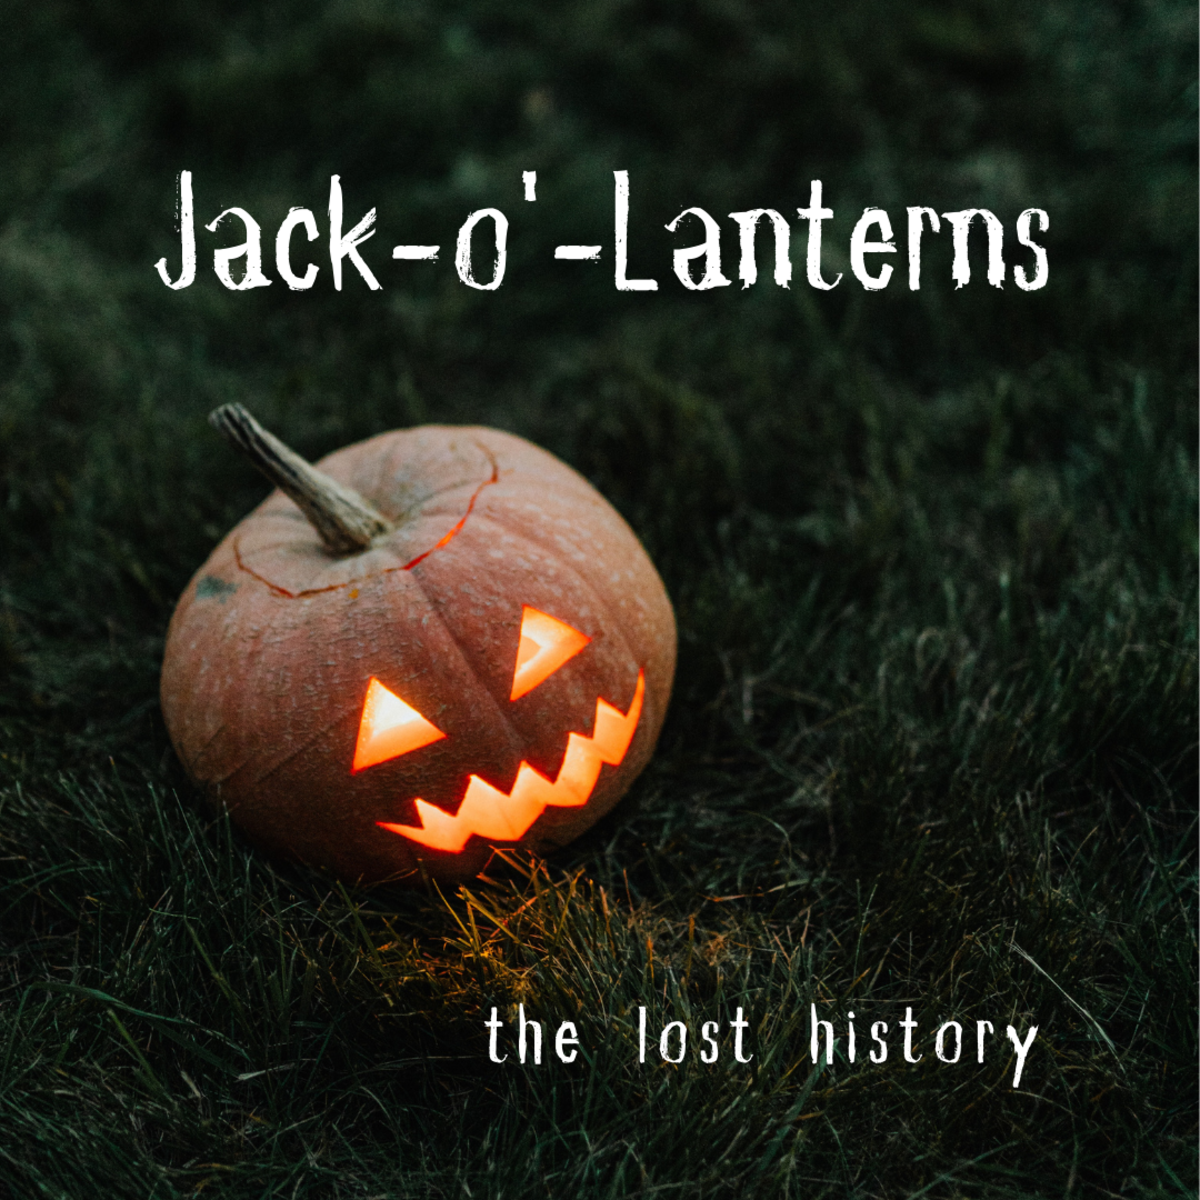 jack-olantern-and-his-many-cousins-also-named-jack